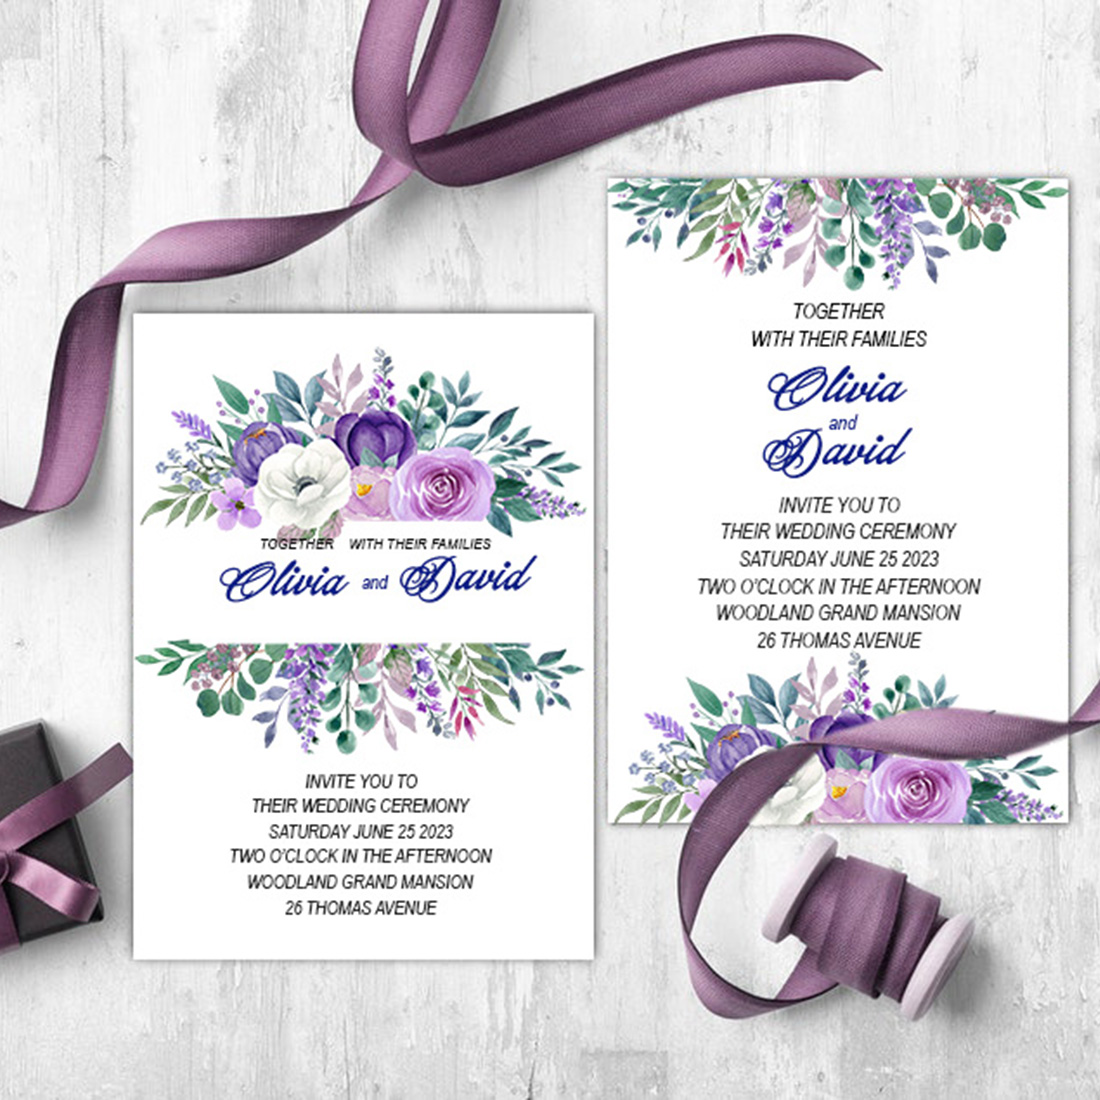 Set of Watercolor Wedding Bouquets and Flowers in Purple Tones for wedding design.